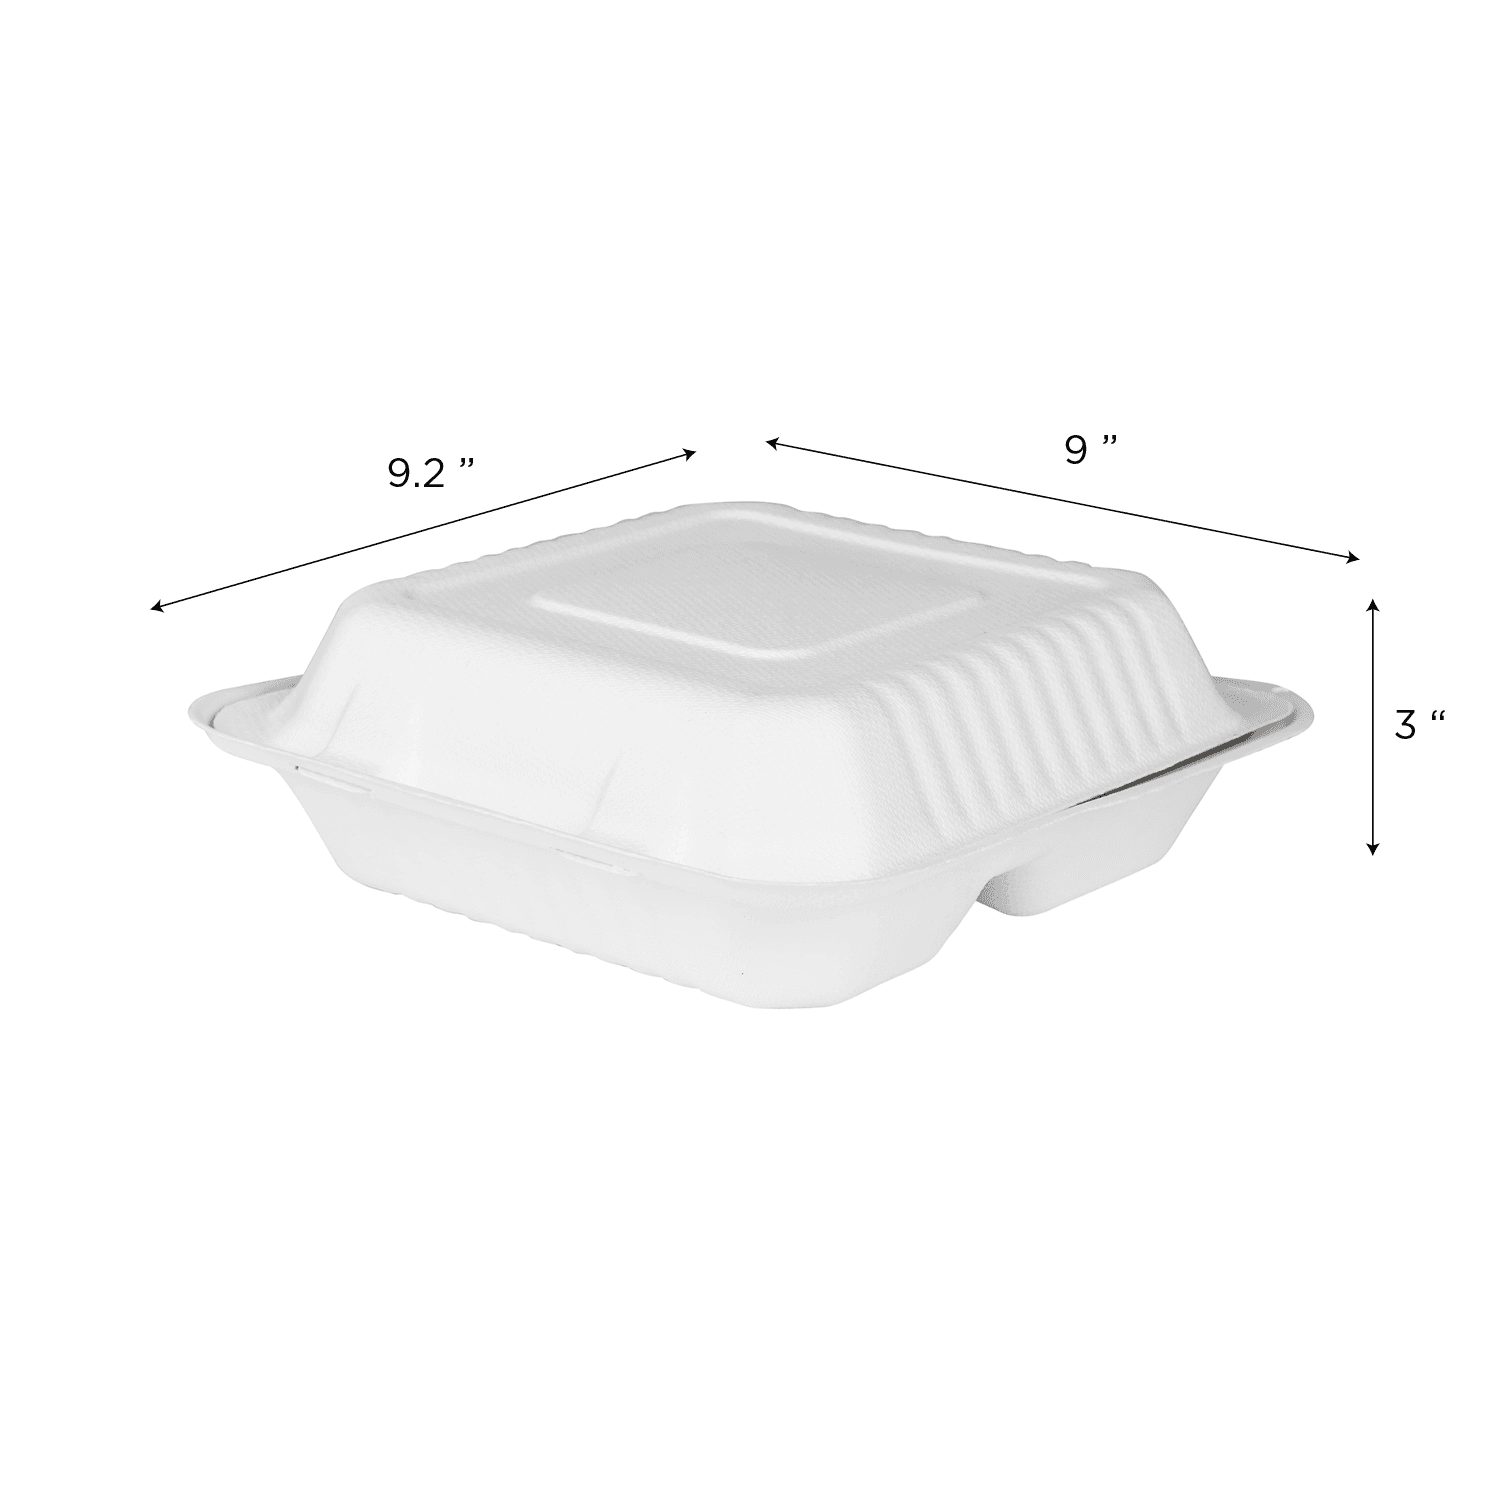 Karat Earth 9"x9" PFAS Free Compostable Bagasse Hinged Container, White, 3 Compartments - 200 pcs